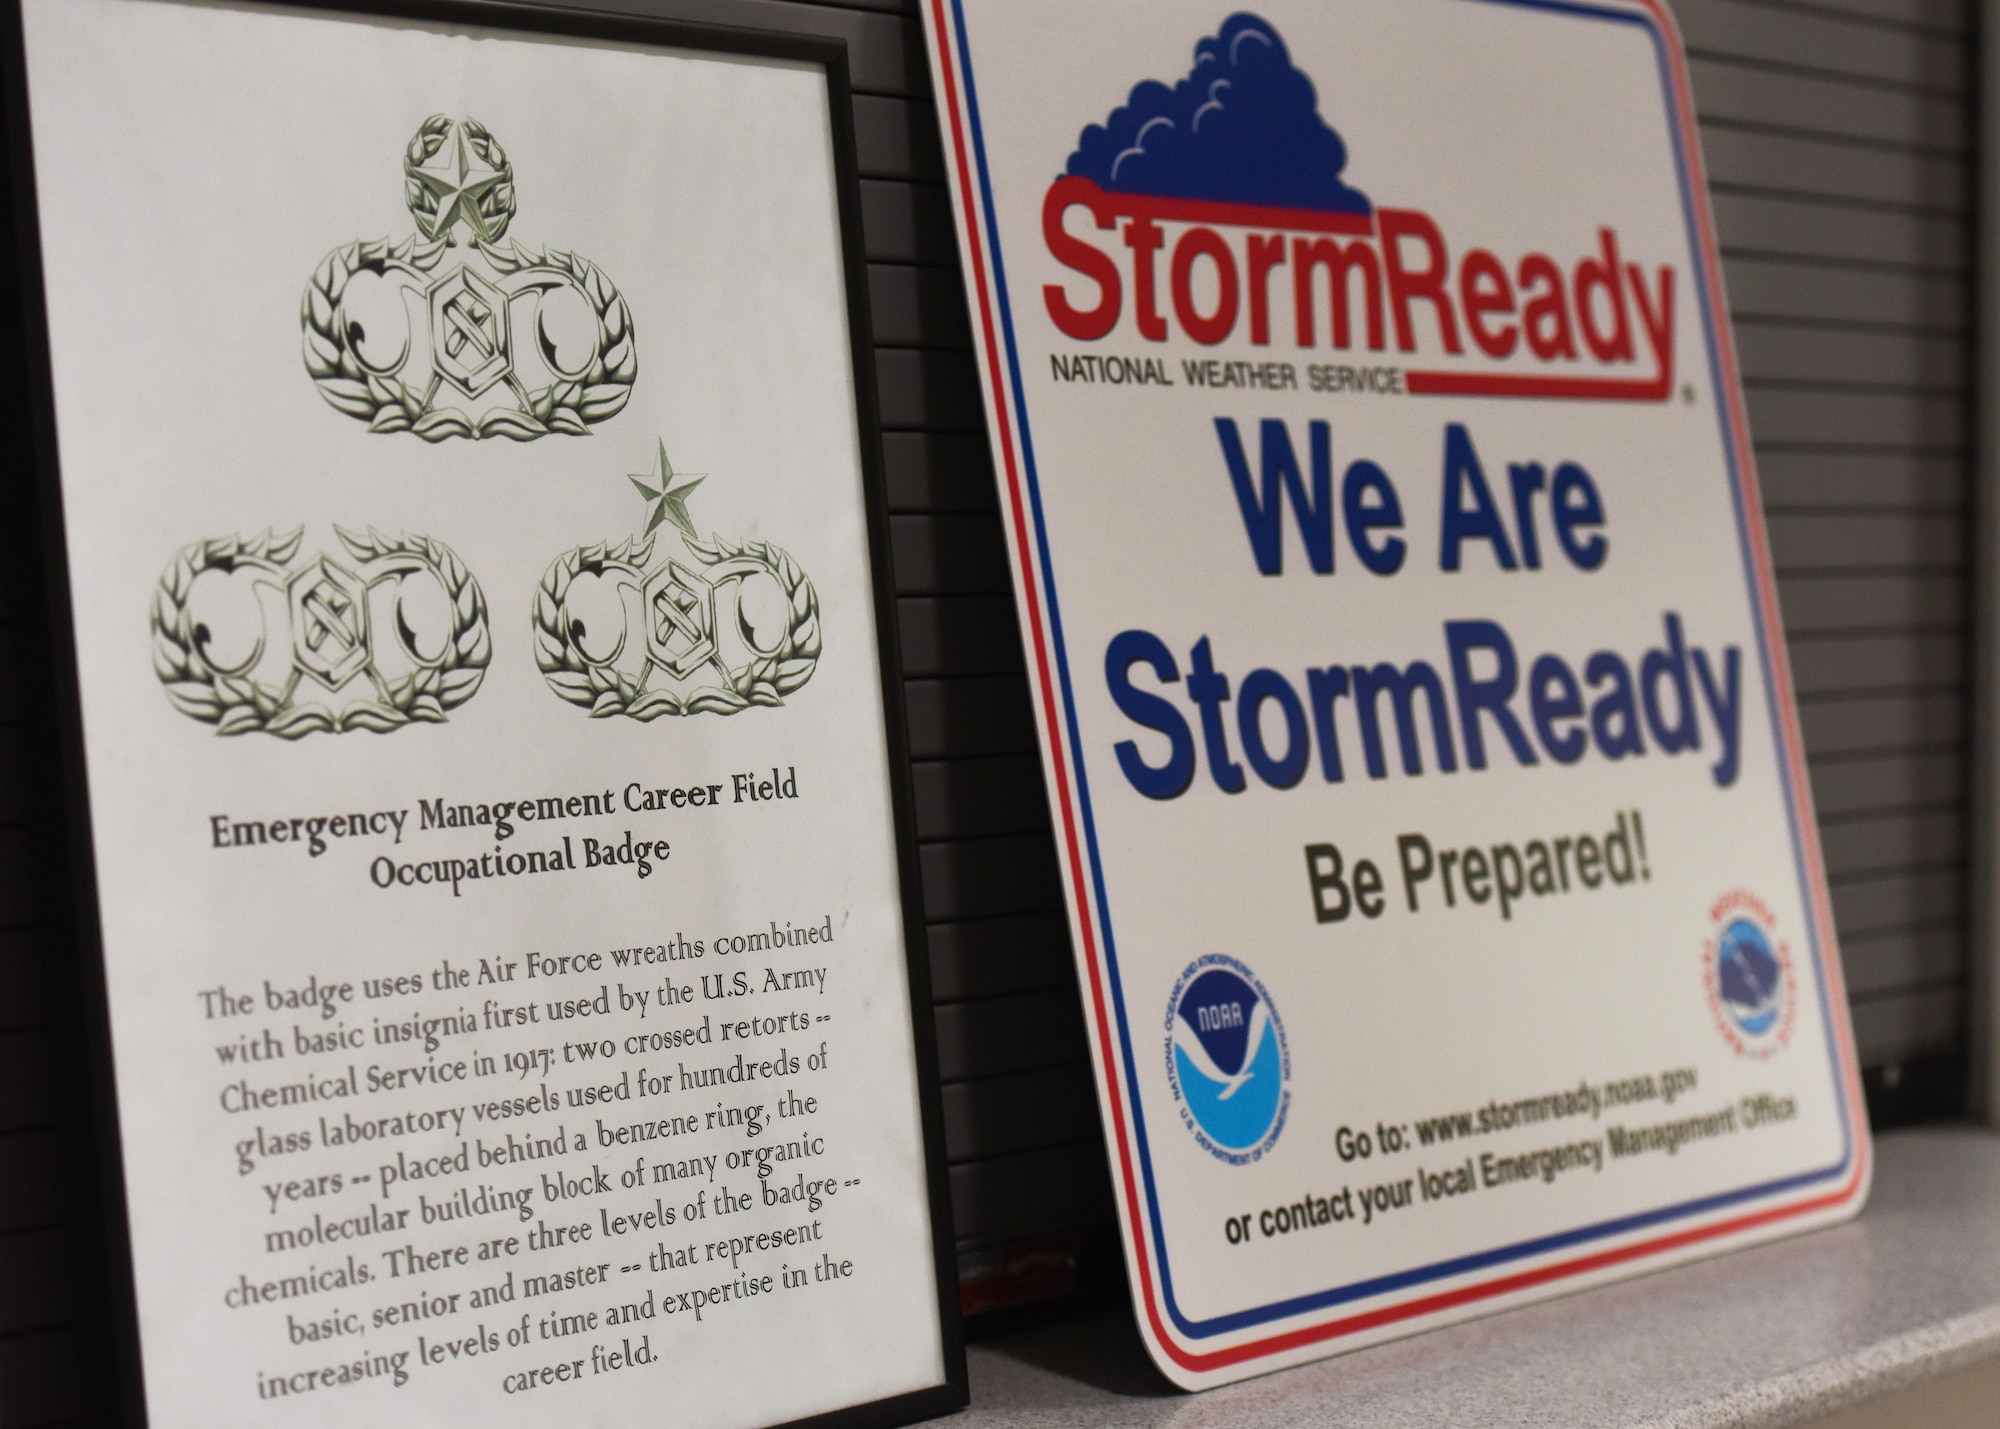 Signs in the 509th Bomb Wing Emergency Management work center display the Career Field Occupational Badge history and National Weather Service 'Storm Ready' information.  The badge symbols and adverse weather sign show the range of different Emergency Management responsibilities.